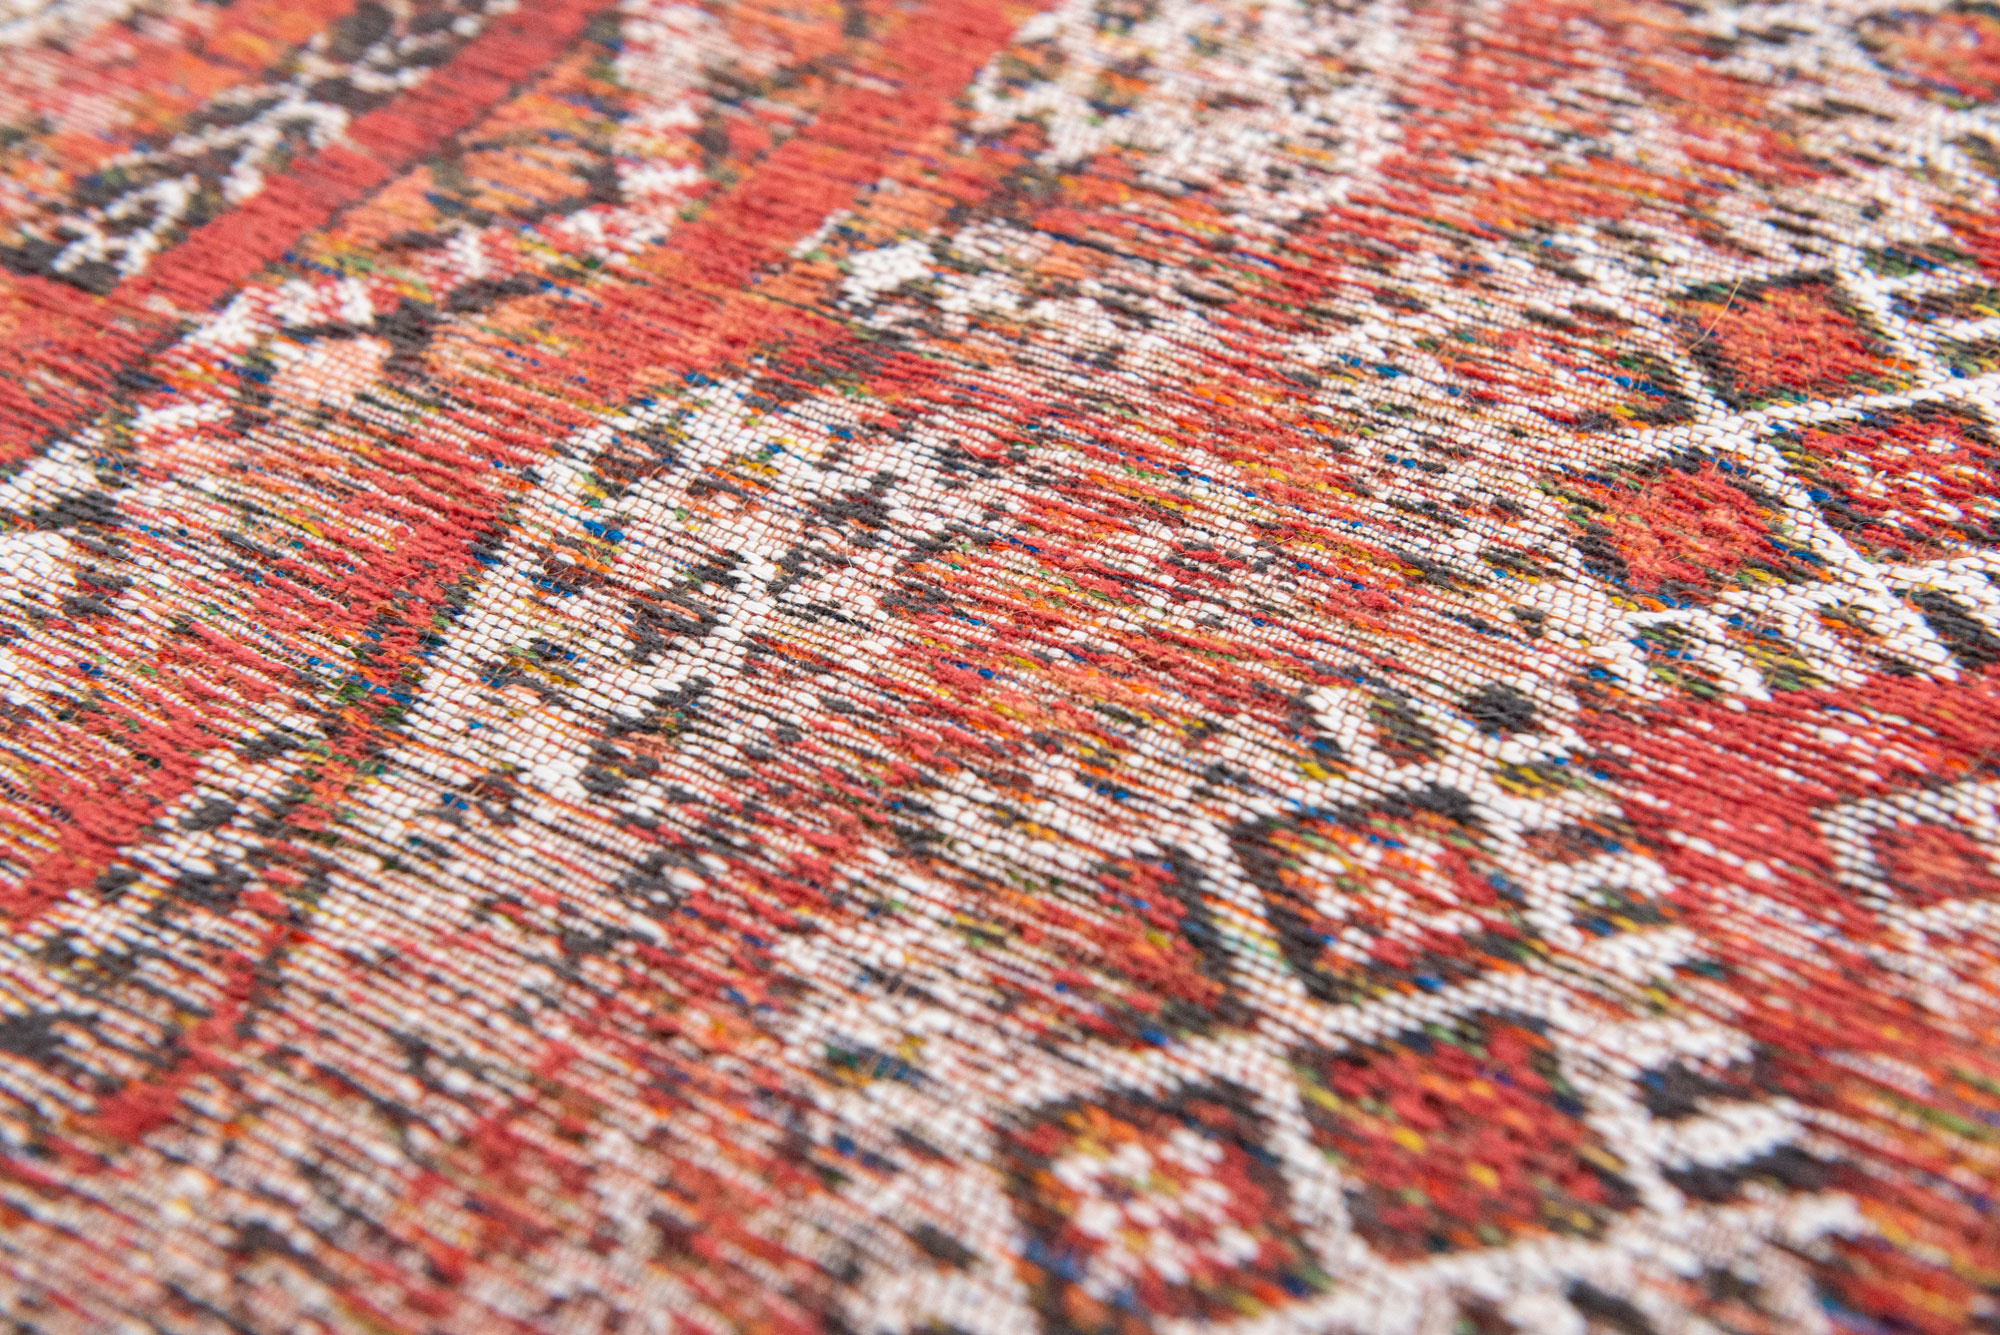 Antiquarian Flatwoven Red Rug ☞ Size: 6' 7" x 9' 2" (200 x 280 cm)